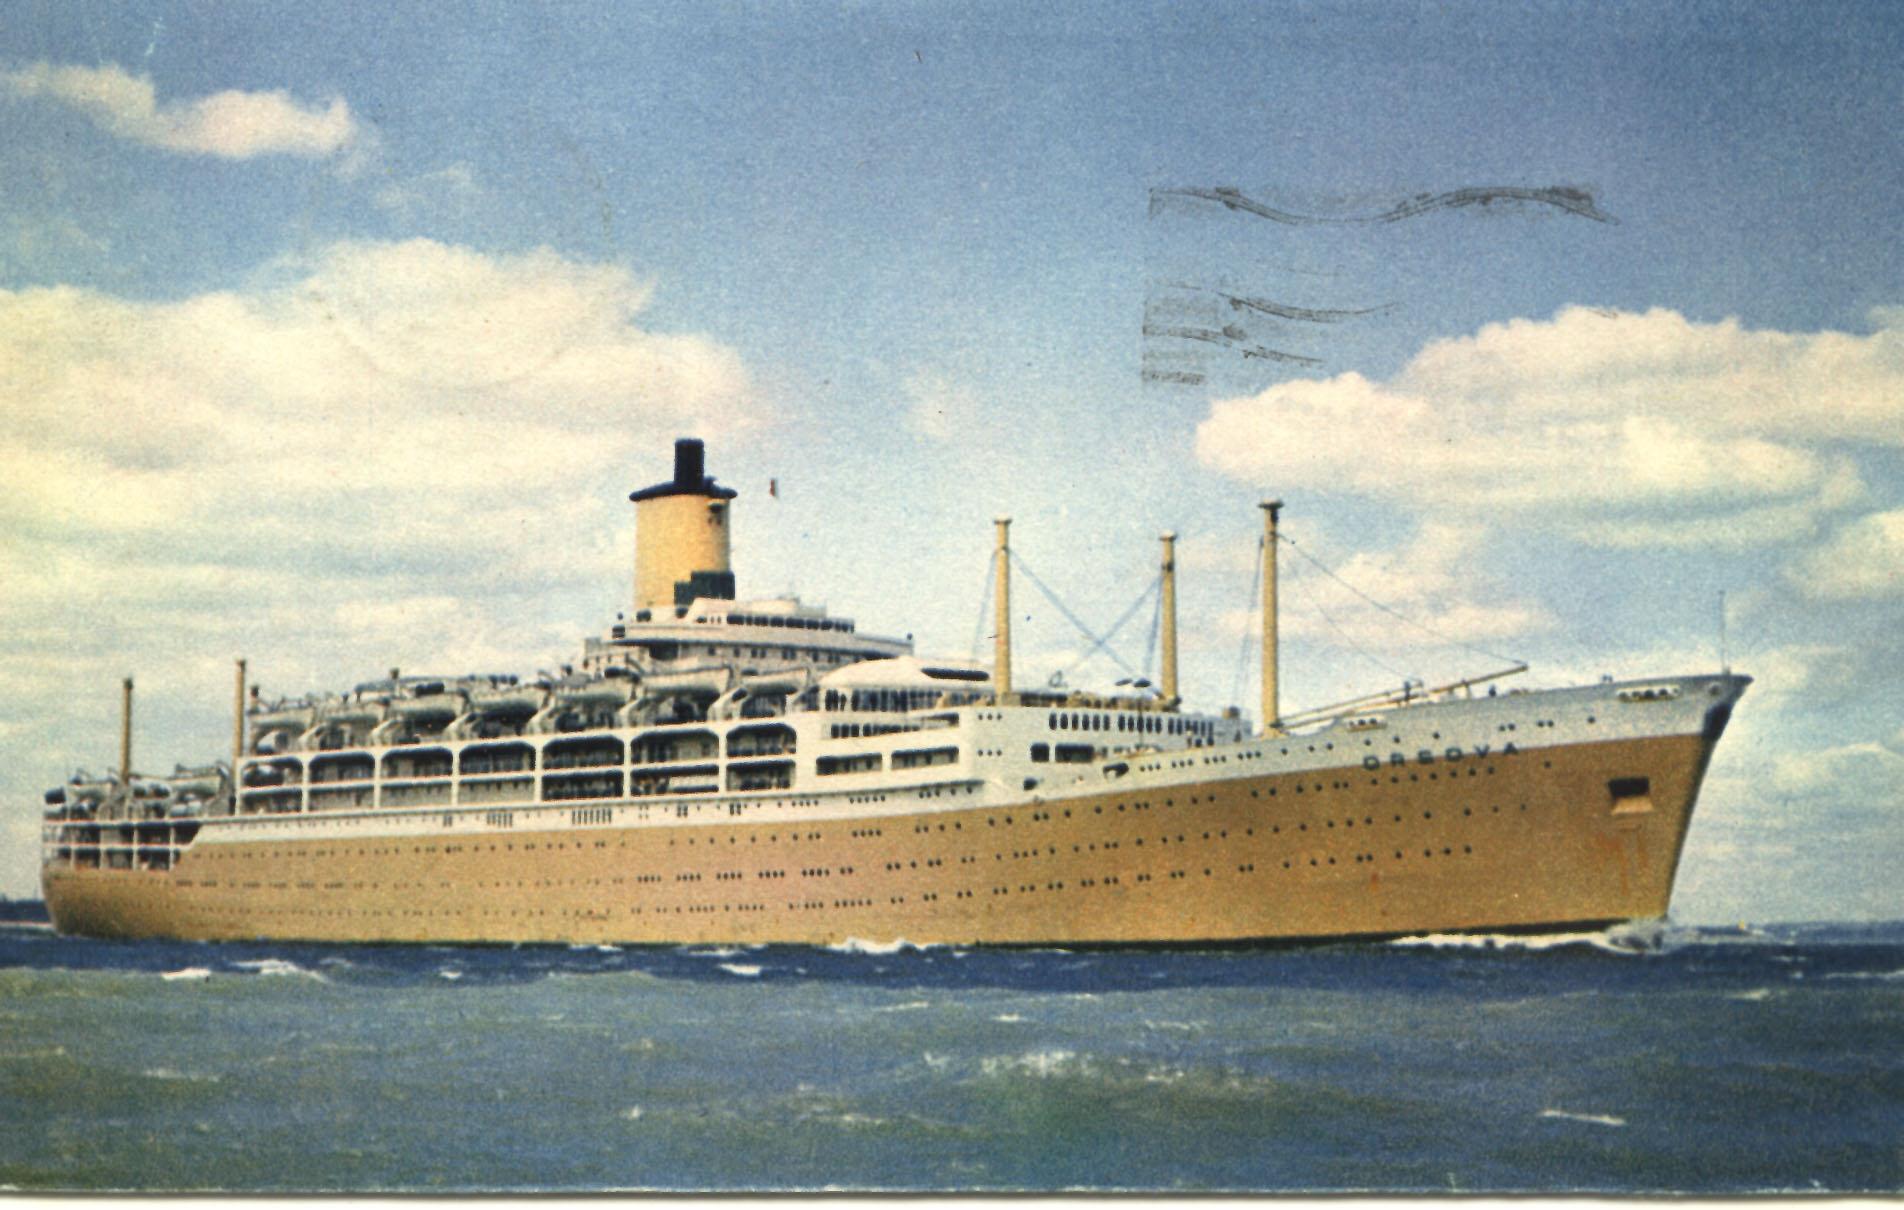 Passenger Vessel "S.S. Orsova", launched on 14 May 1953 by Lady Anderson and completed in February 1954.  Built by Vickers-Armstrongs Ltd - Barrow-In-Furness, England.  She took her inaugural voyage on 17 march 1954 from London to Sydney.
Base Port:  Ini